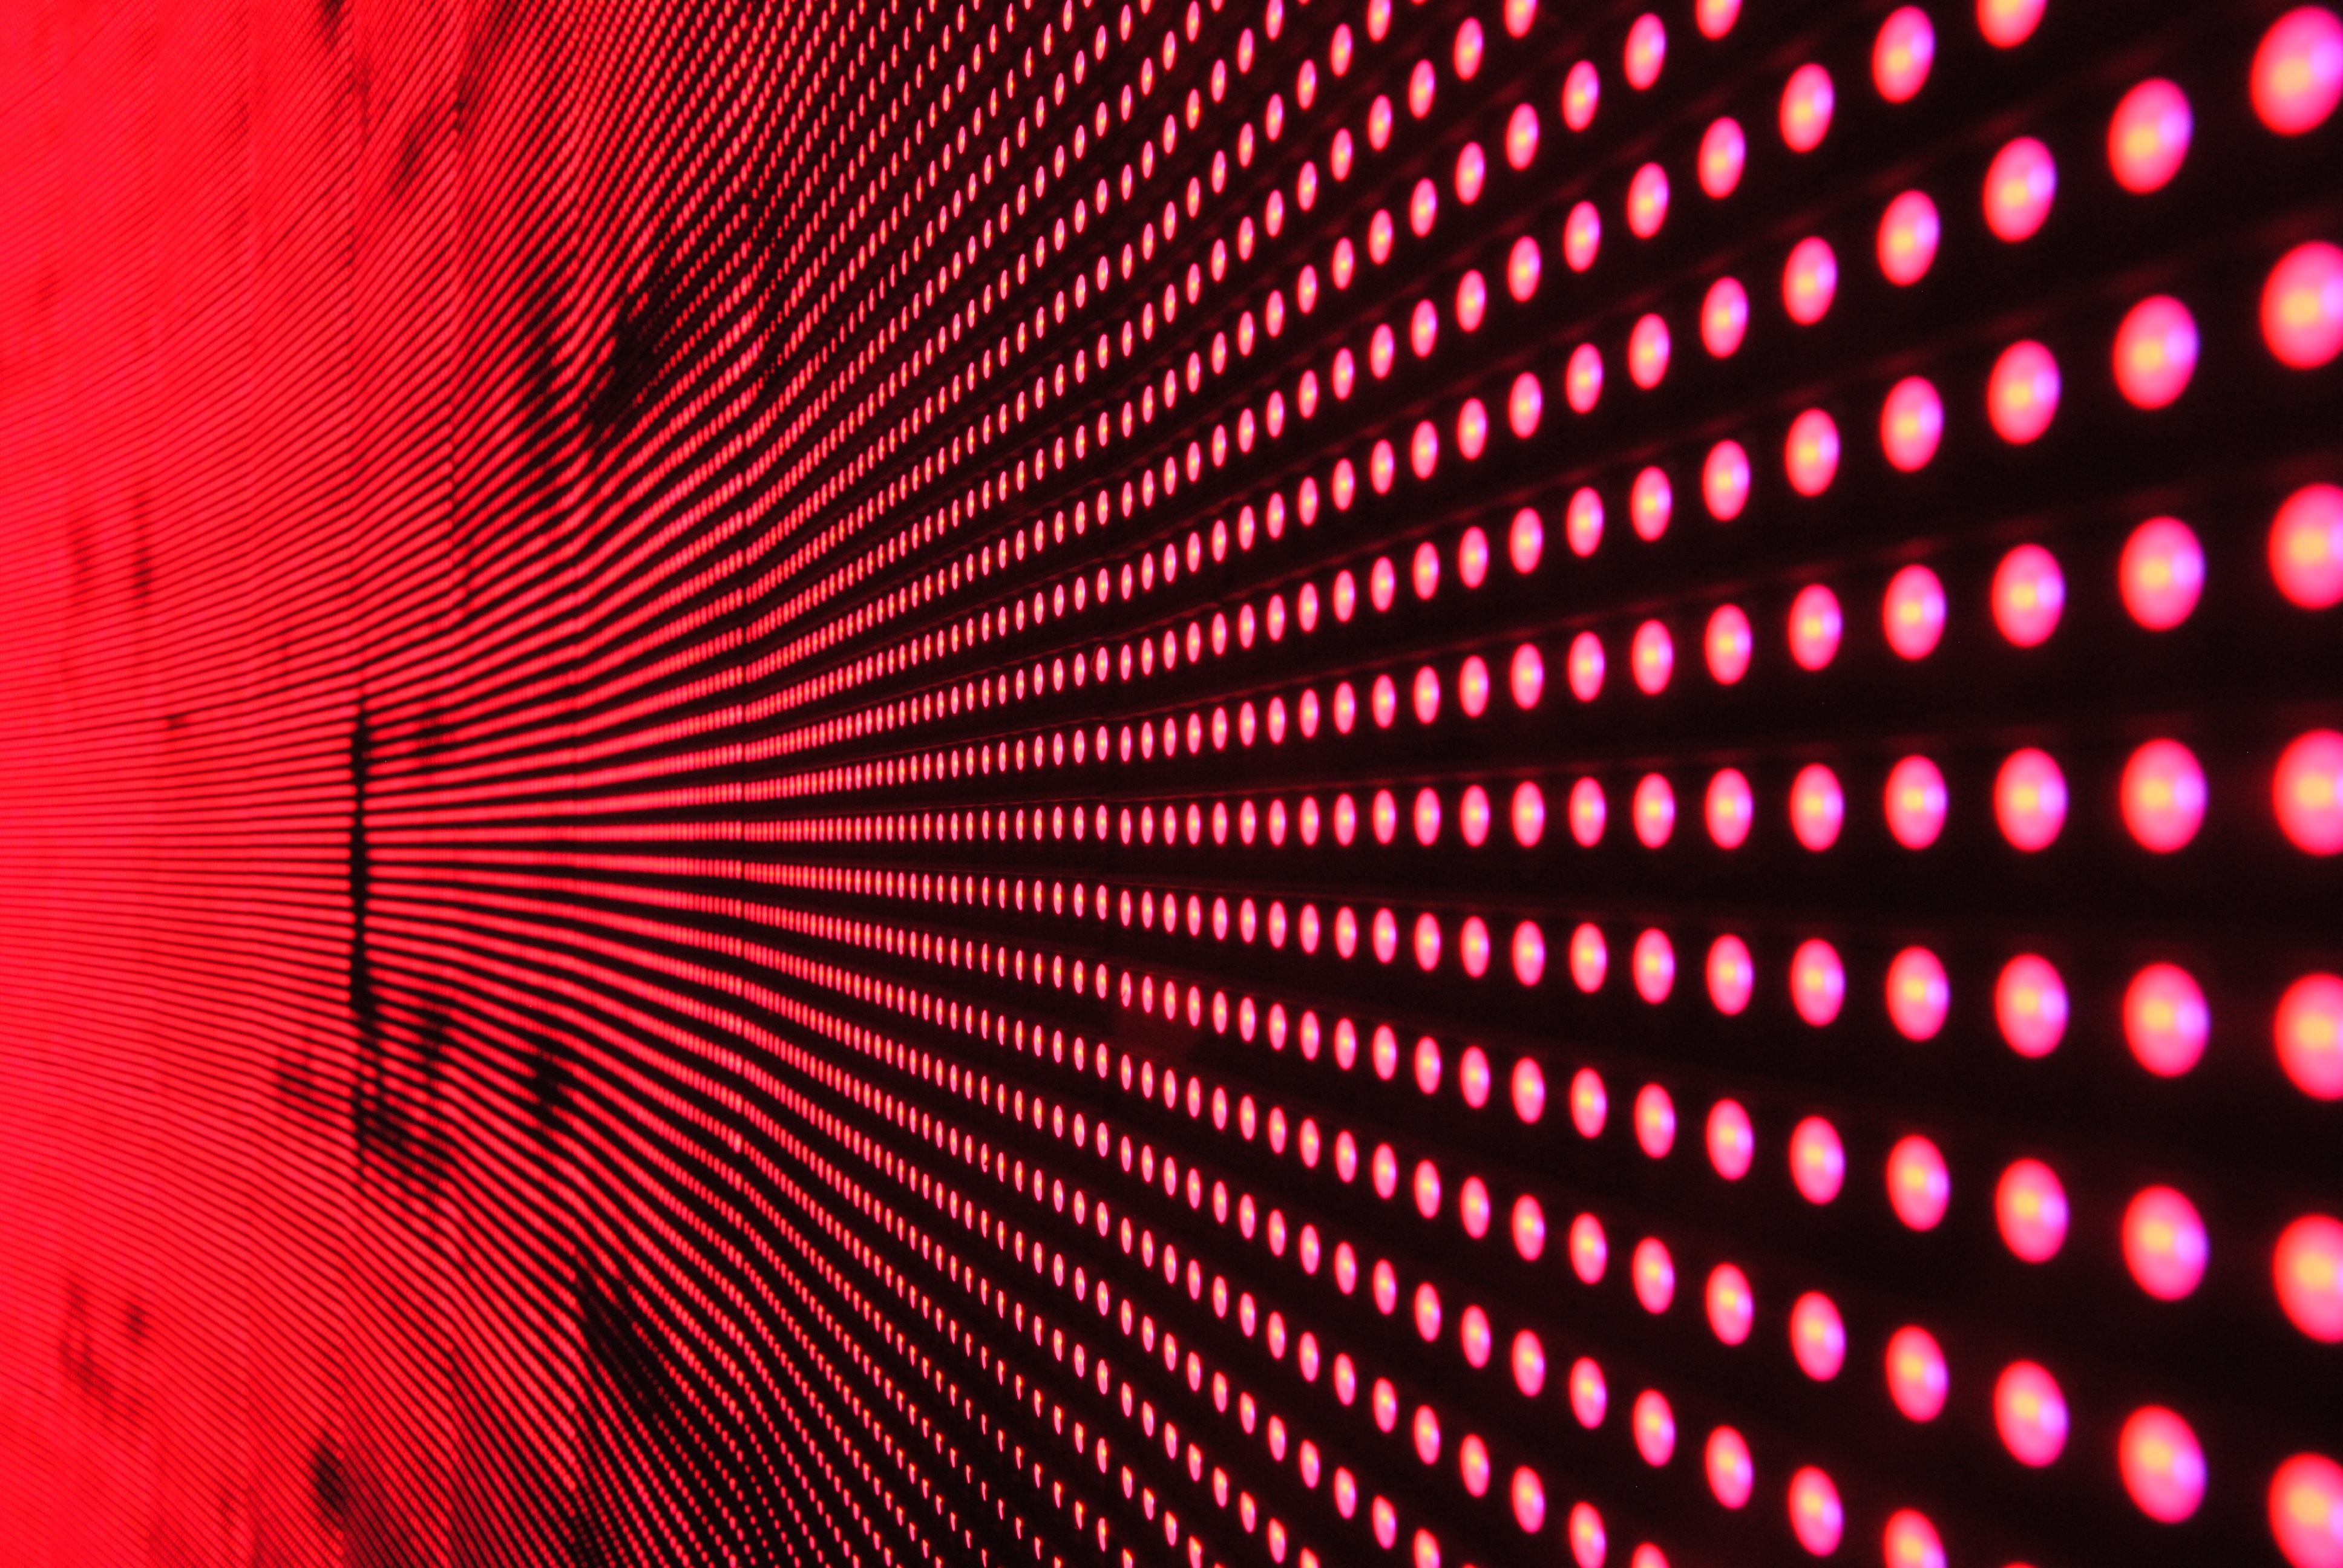 Free Image, abstract, structure, texture, wall, pattern, line, red, color, colorful, movement, signage, modern, circle, background image, font, lights, design, bright, led, shape, light source, screen background, indirect lighting, computer wallpaper